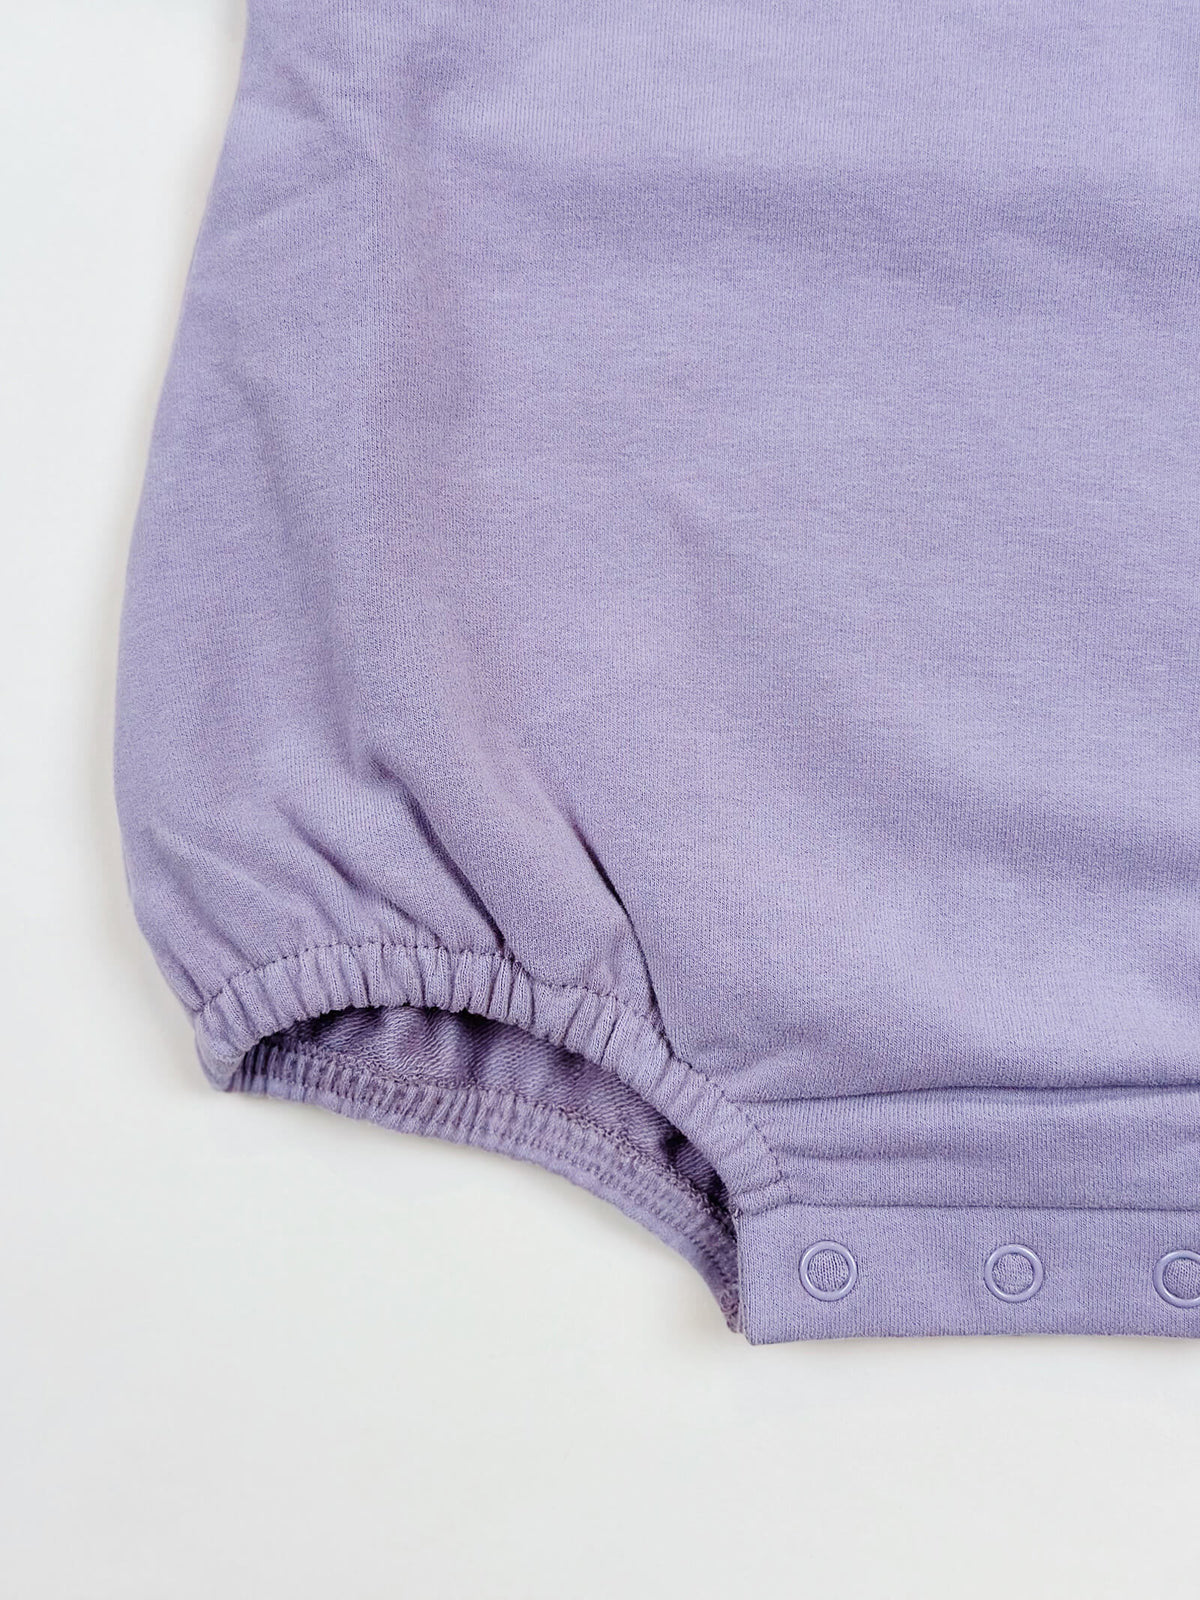 Lilac French Terry Onesie in Organic Cotton